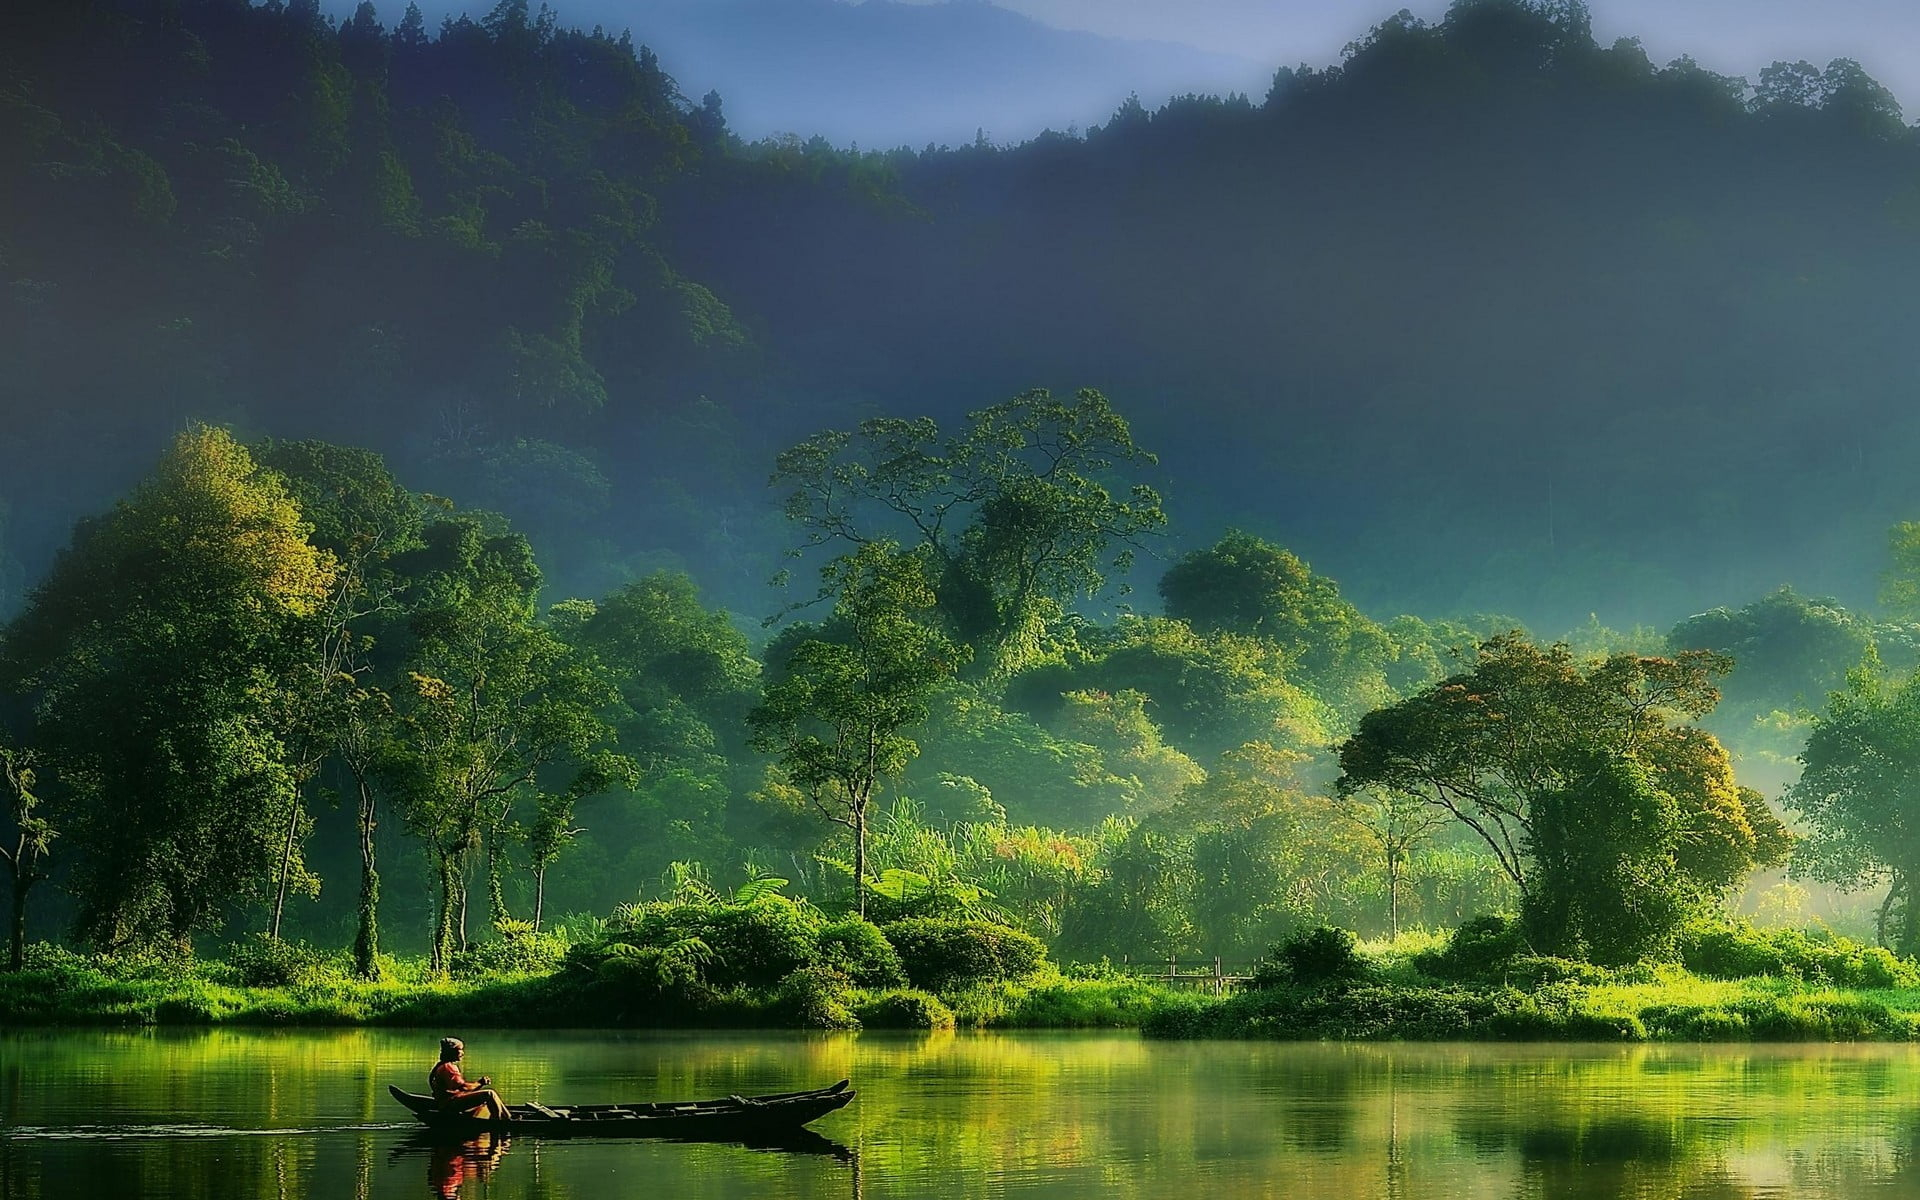 Green leafed tree wallpaper, nature, landscape, mist, forest, river, mountains